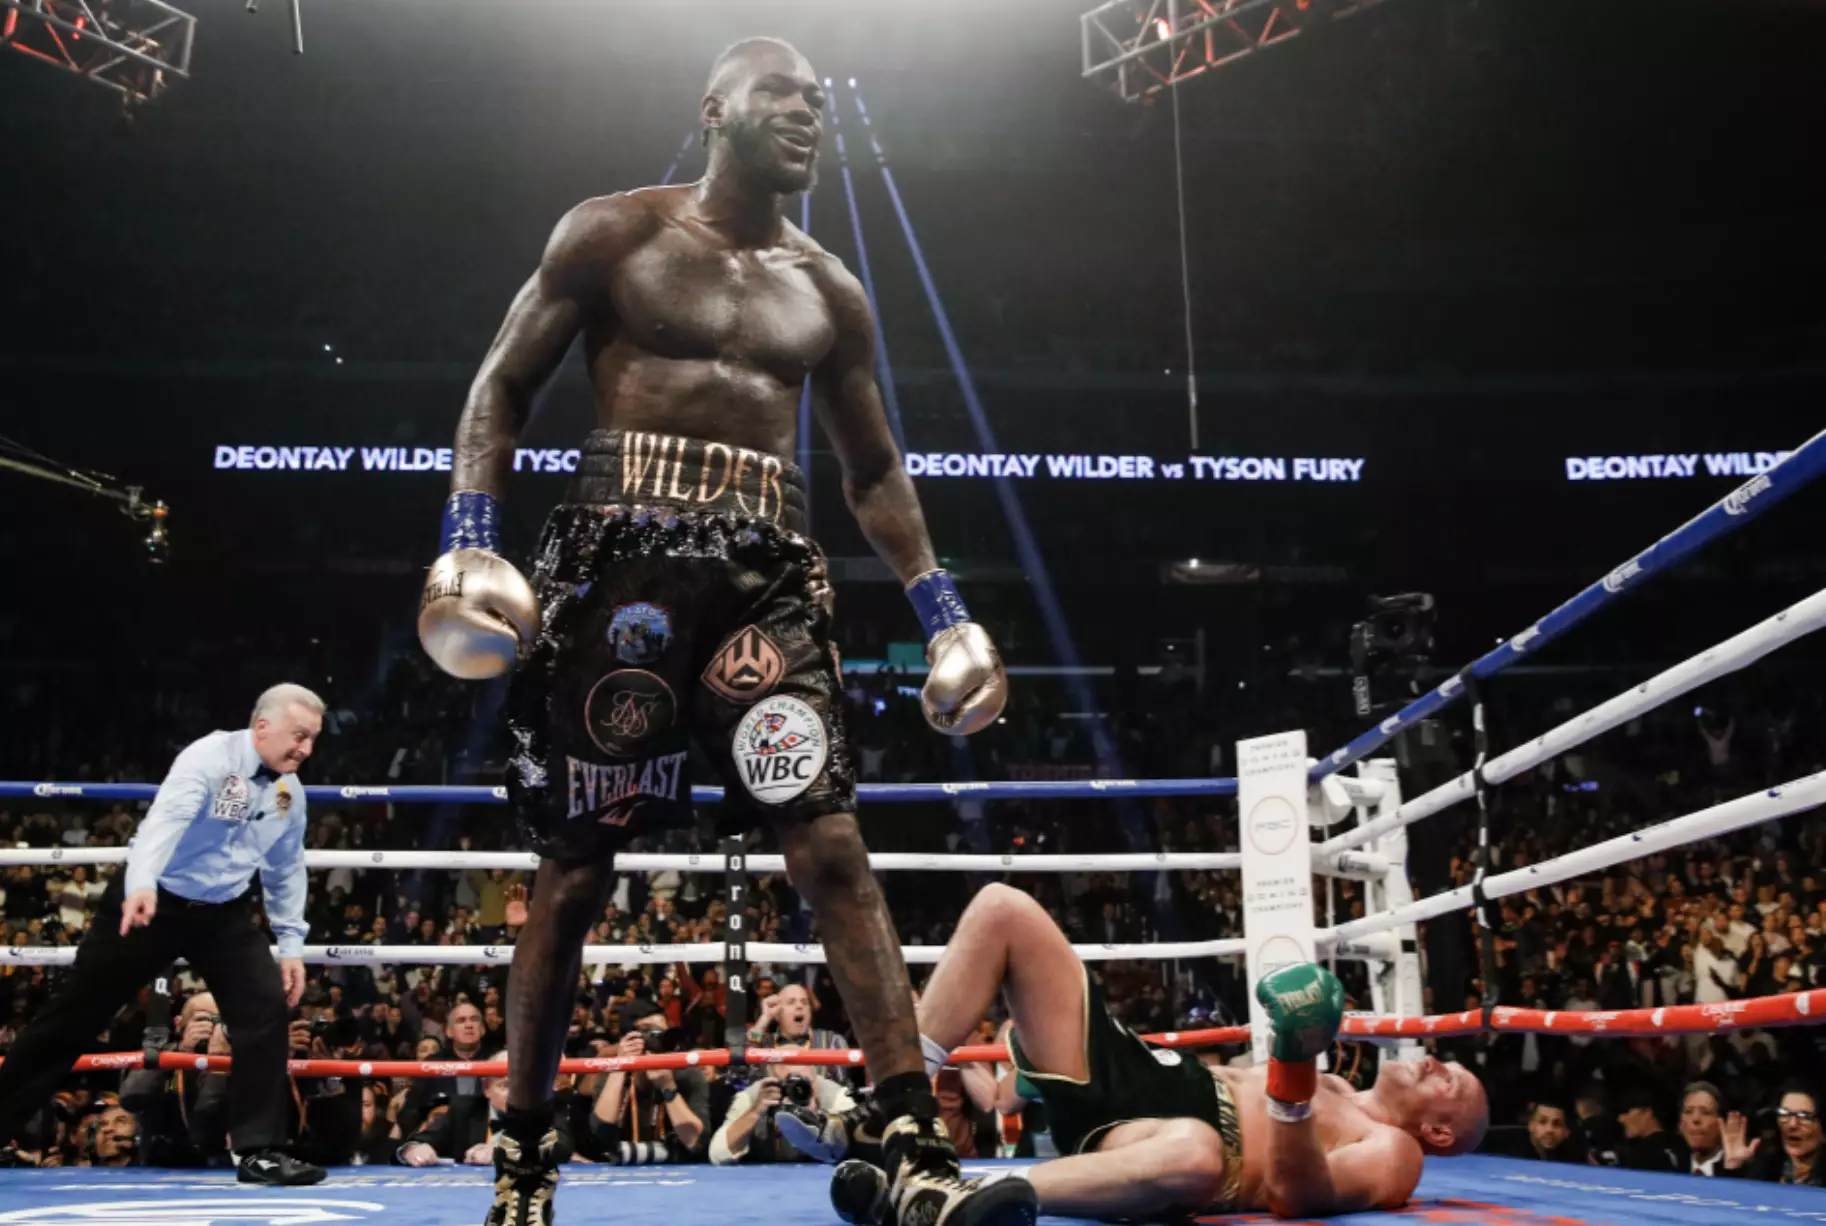 Deontay Wilder has put Fury on the canvas before